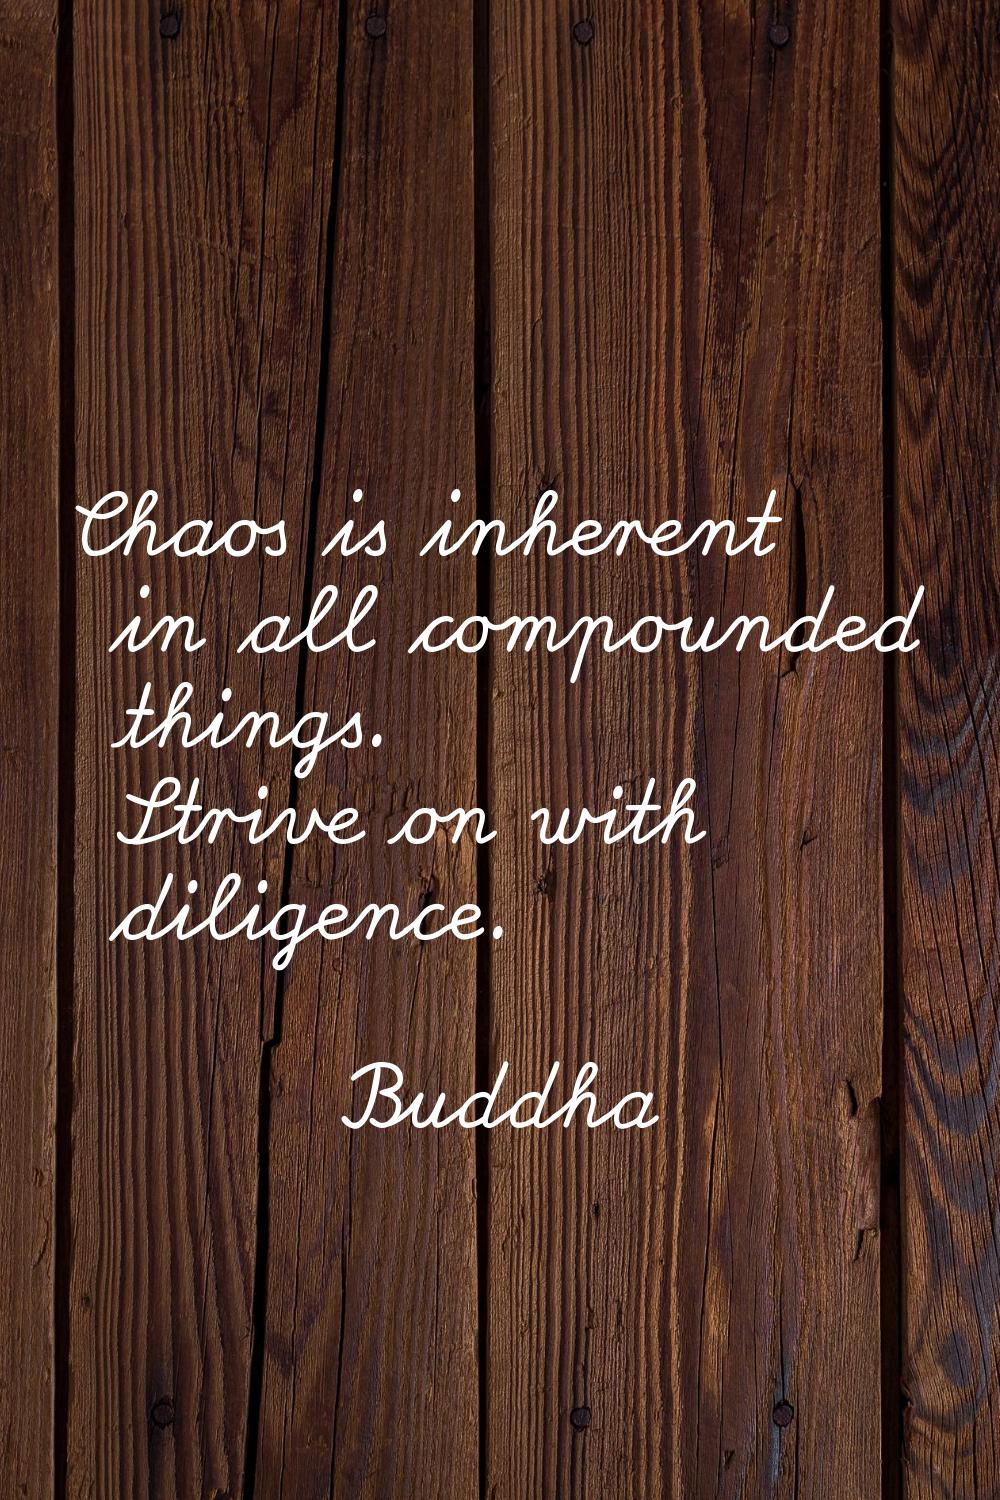 Chaos is inherent in all compounded things. Strive on with diligence.